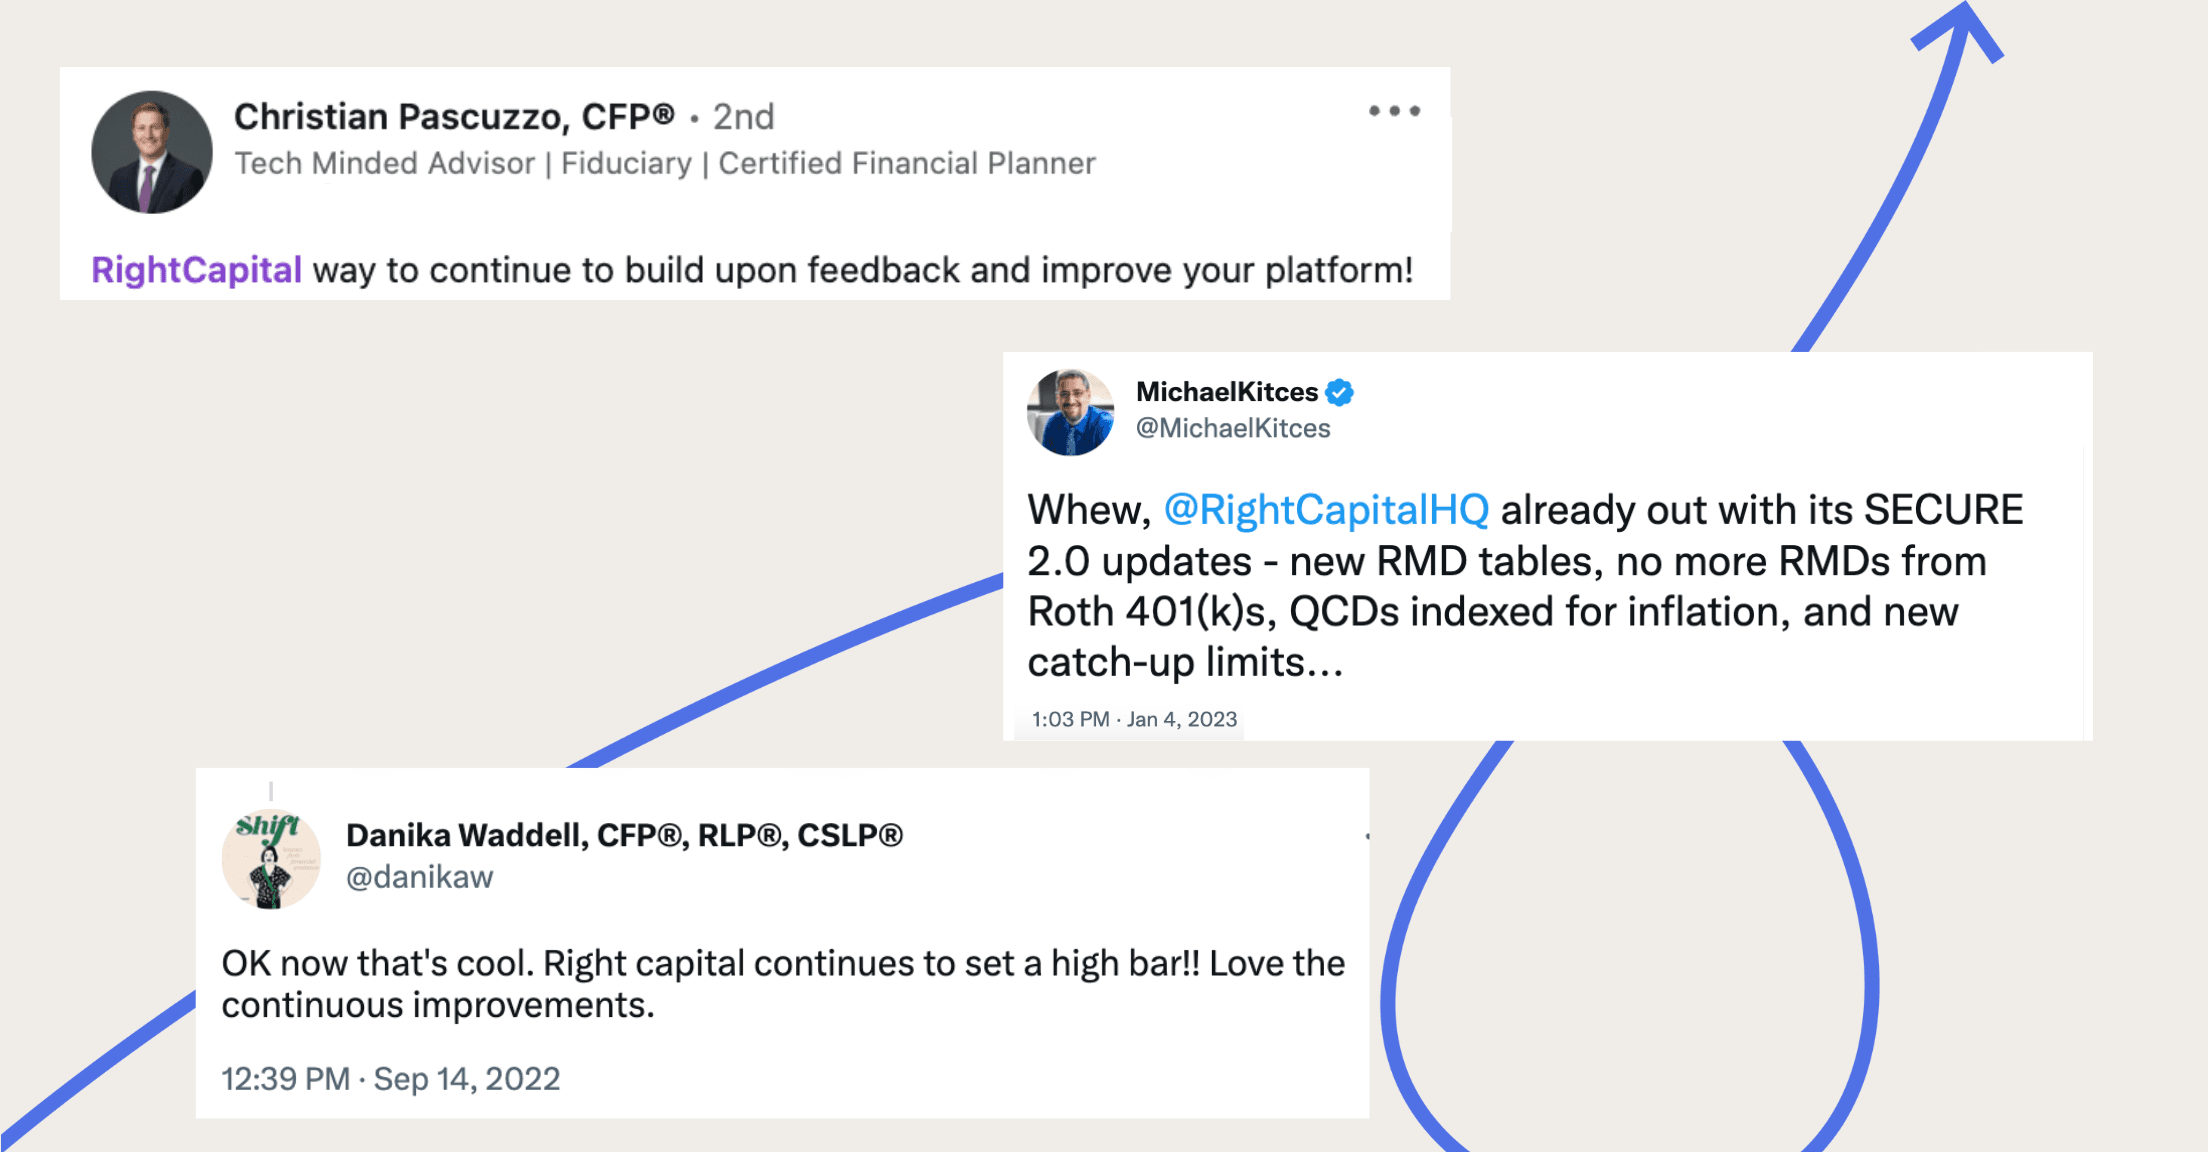 Tweets about how much RightCapital is constantly improving and innovating